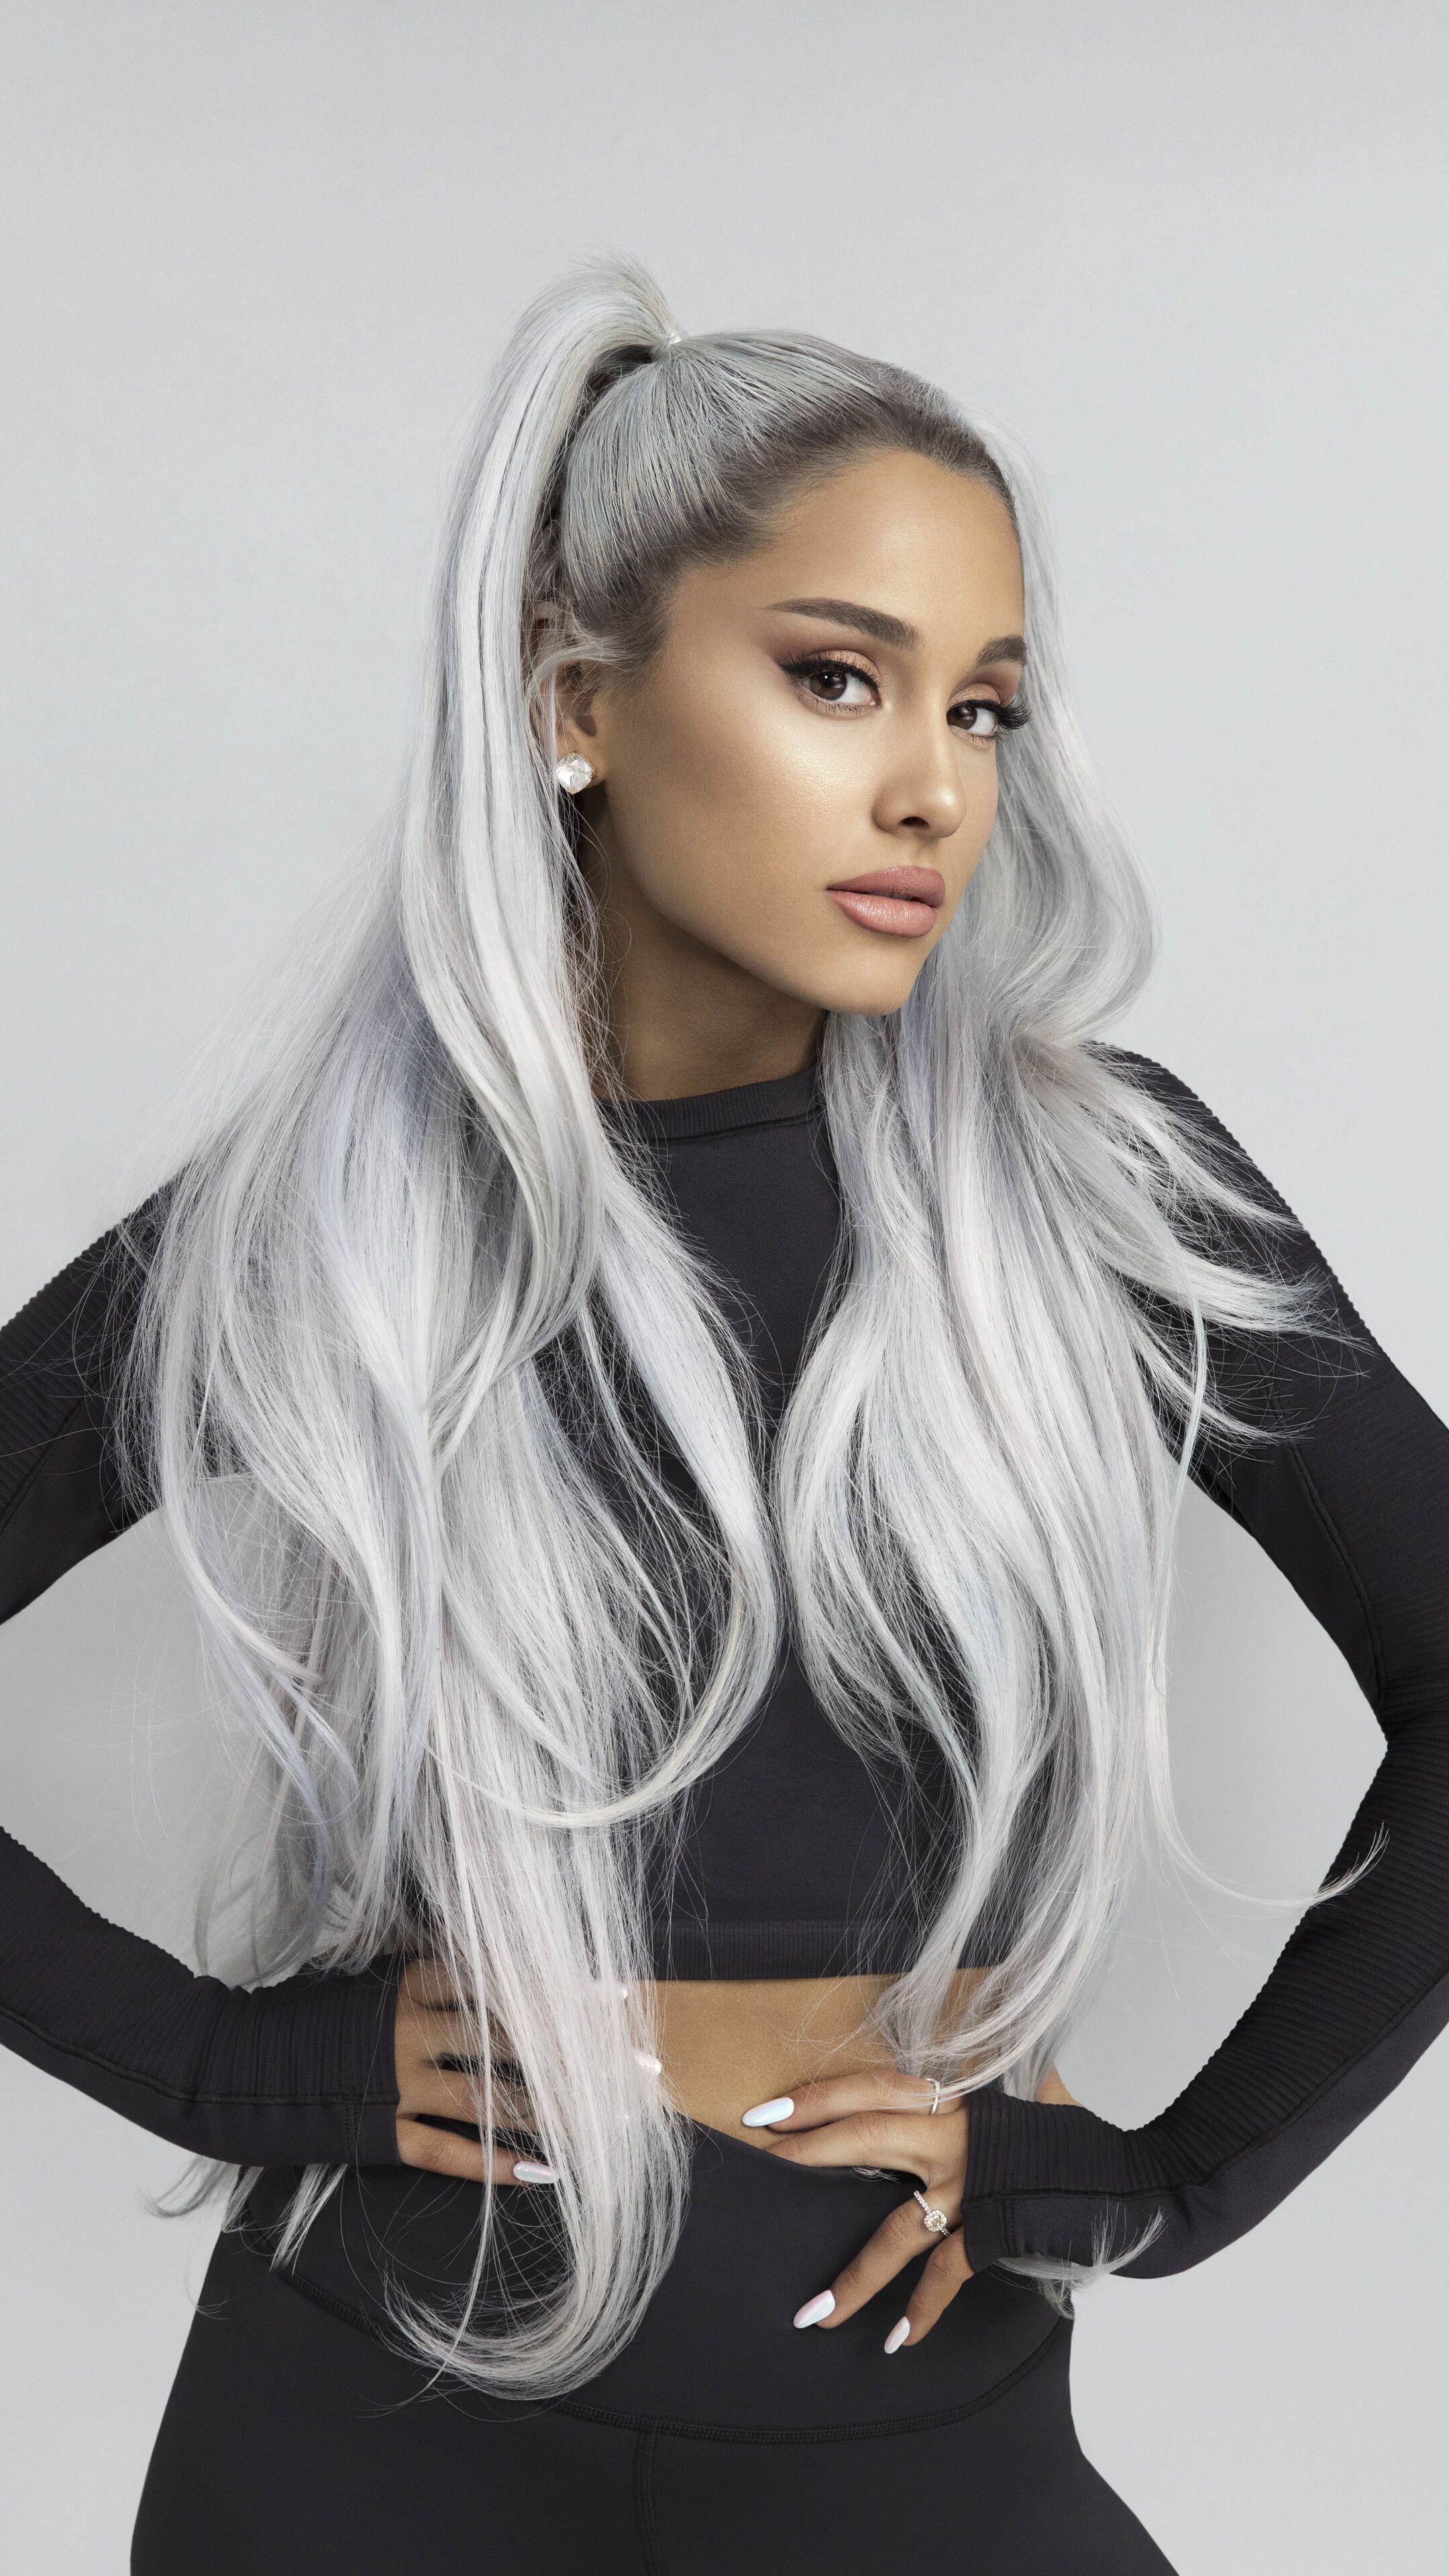 Ariana Grande phone HD Wallpaper, Image, Background, Photo and Picture. Mocah HD Wallpaper